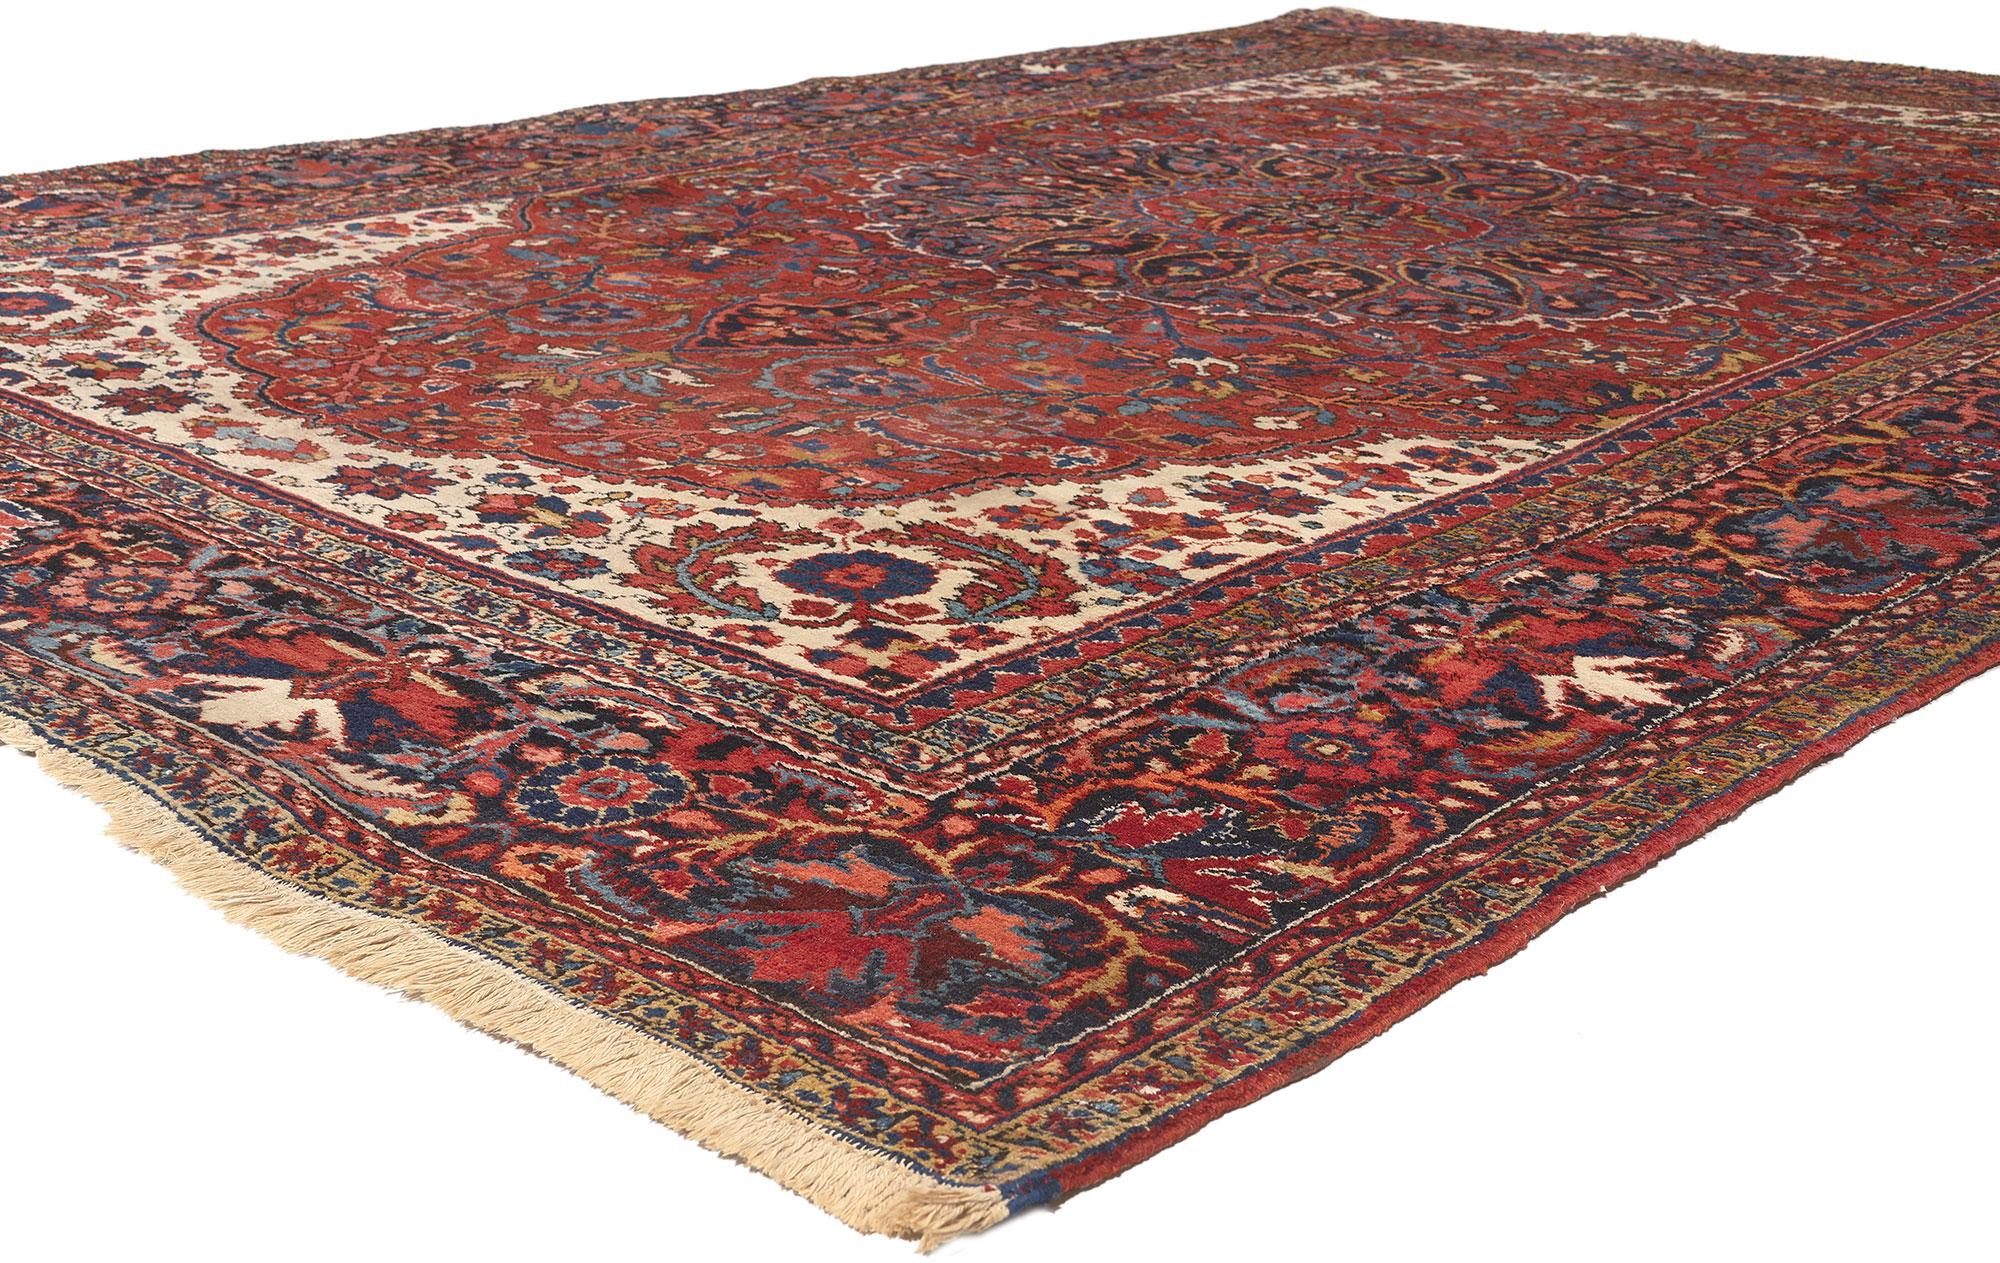 78641 Antique Persian Heriz Rug, 08'00 x 11'11.
Traditional sensibility meets patriotic finesse, this hand knotted wool antique Persian Heriz rug. The striking botanical design and traditional color palette woven into this piece work together